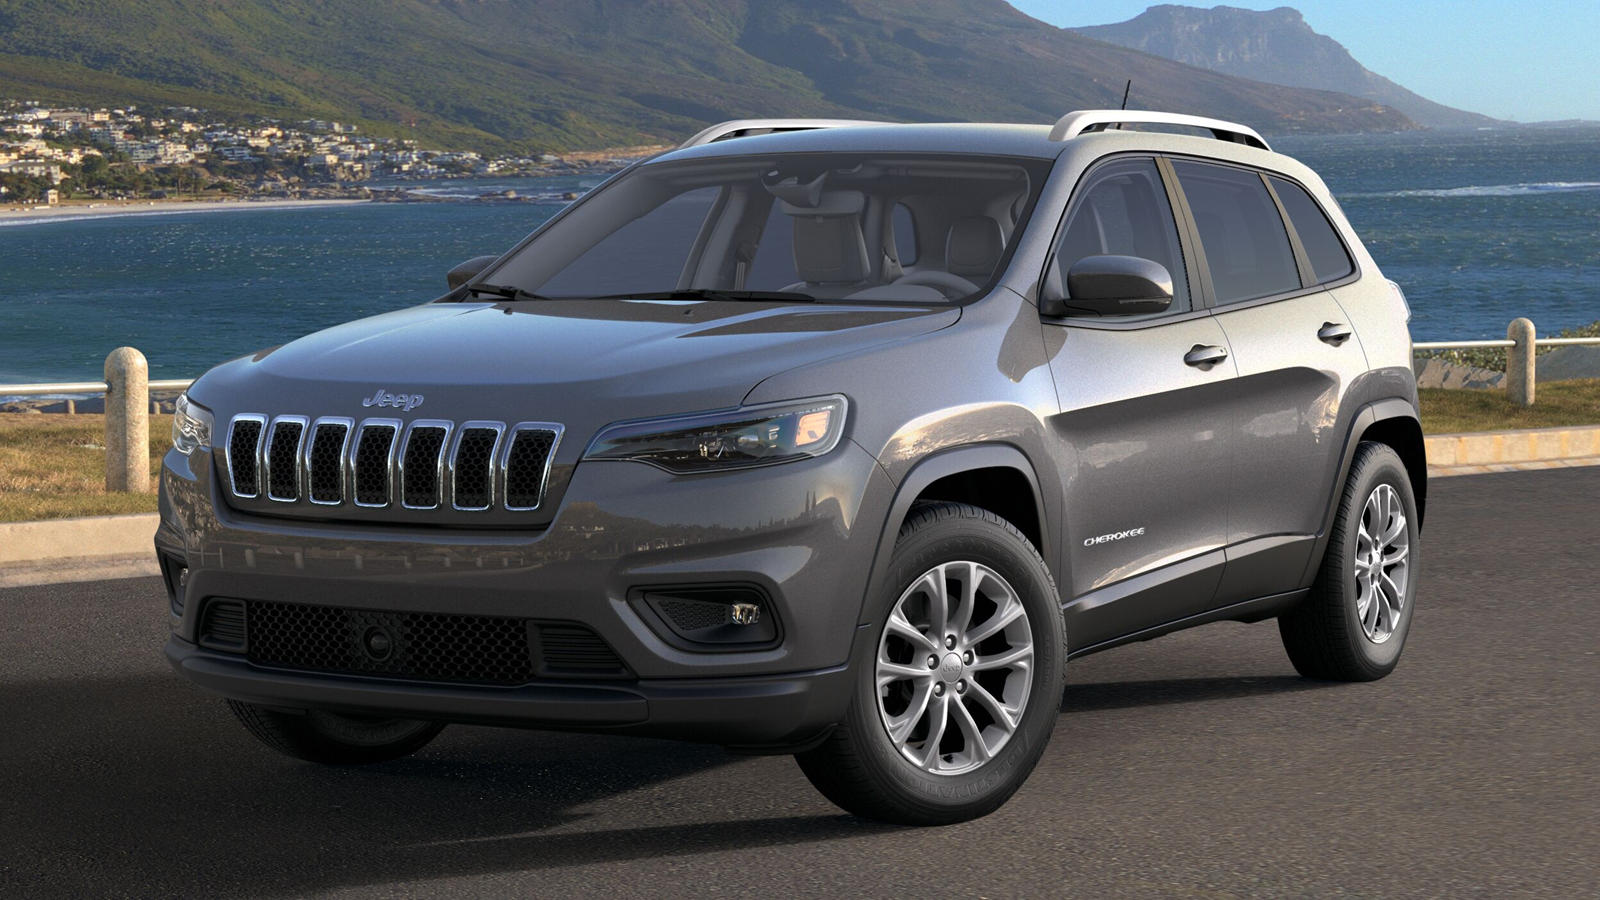 New Jeep Cherokee Latitude LUX Is Luxury On A Budget | CarBuzz